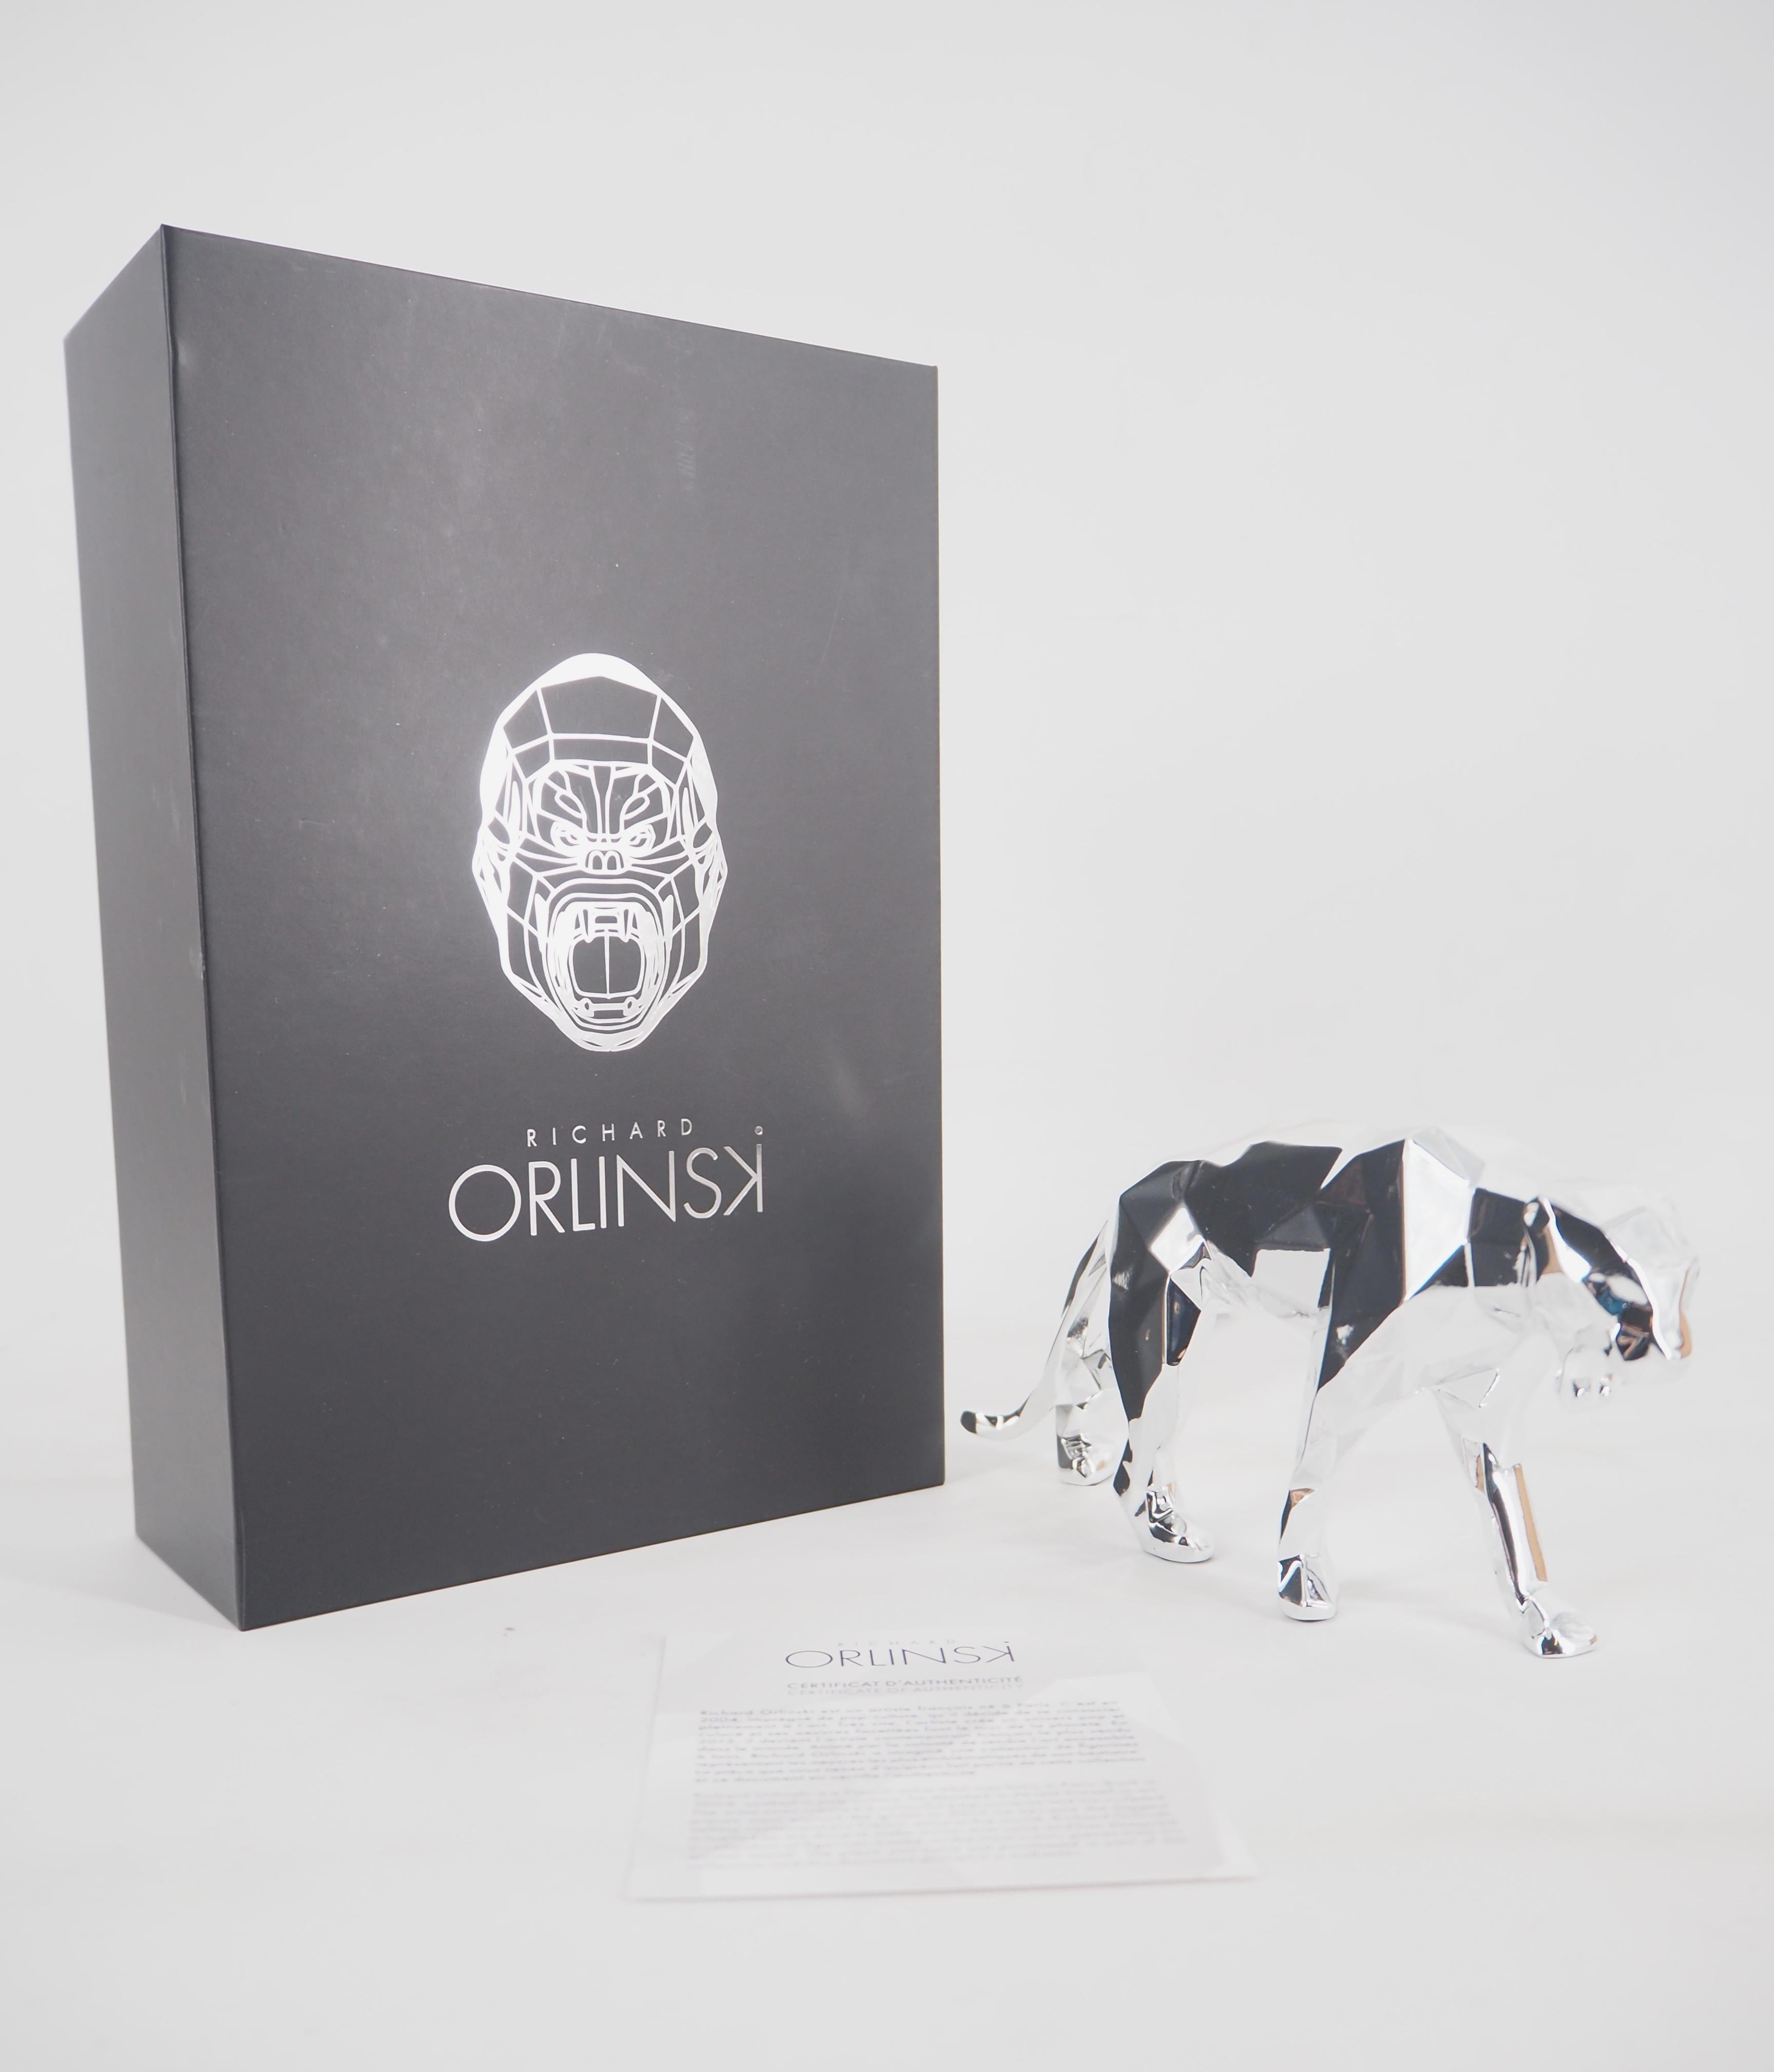 Richard ORLINSKI
Panther Spirit (Silver Edition)

Sculpture in resin
Metallic silver
About 9 x 18 x 3,5 cm (c. 3,5 x 7 x 1,3 in)
Presented in original box with certificate

Excellent condition